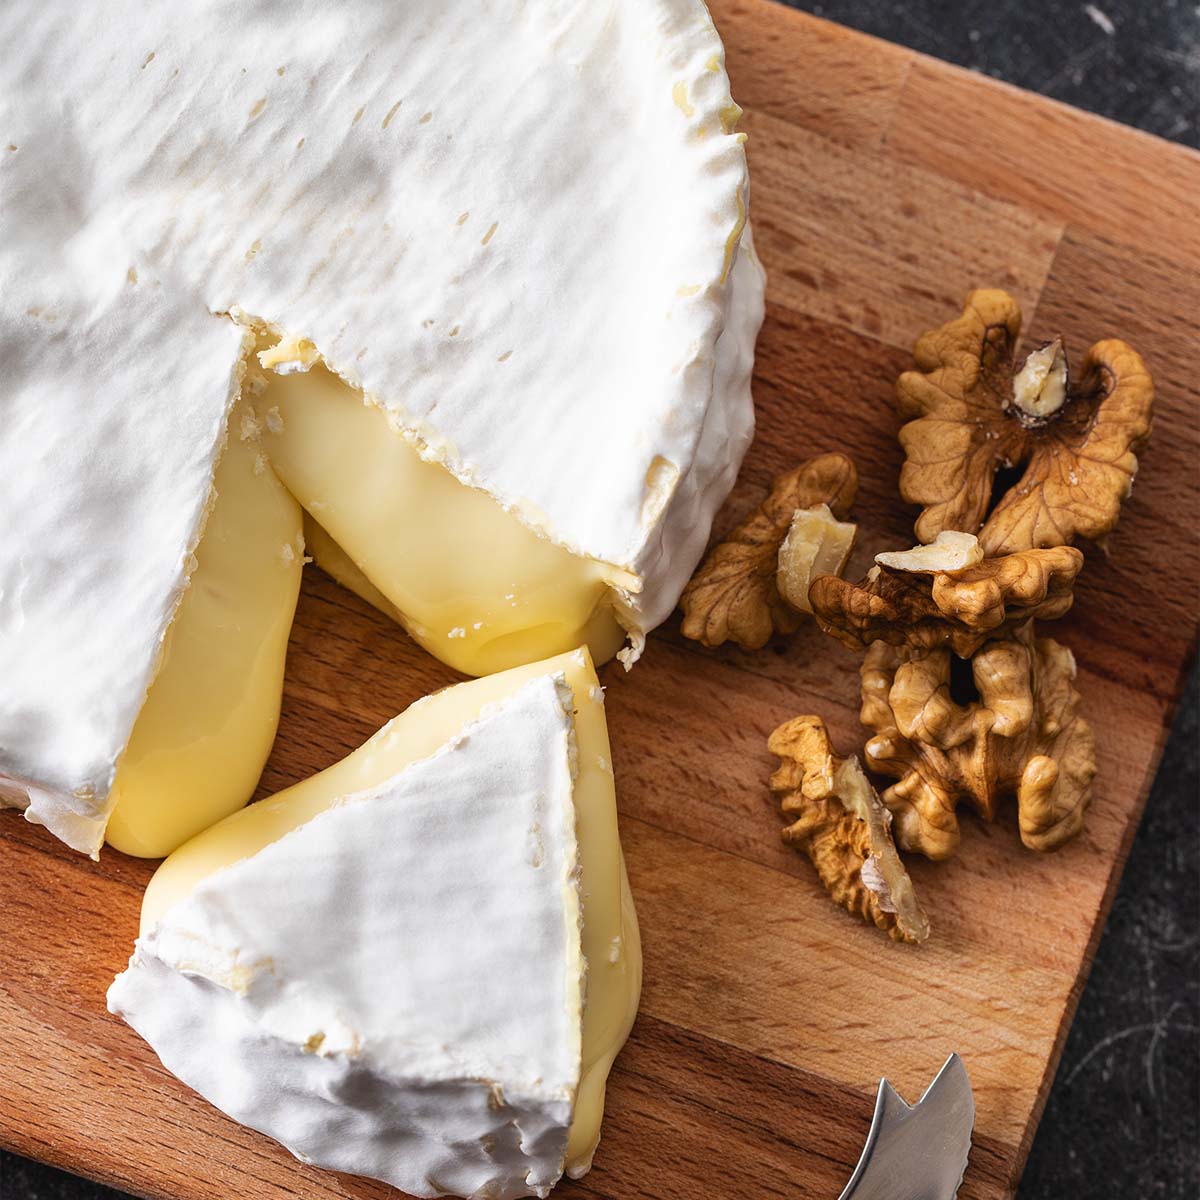 The best way to enjoy Brie is when it is fresh and ripe. It is absolutely scrummy, but there is only so much of the stuff that you can eat before it deteriorates.